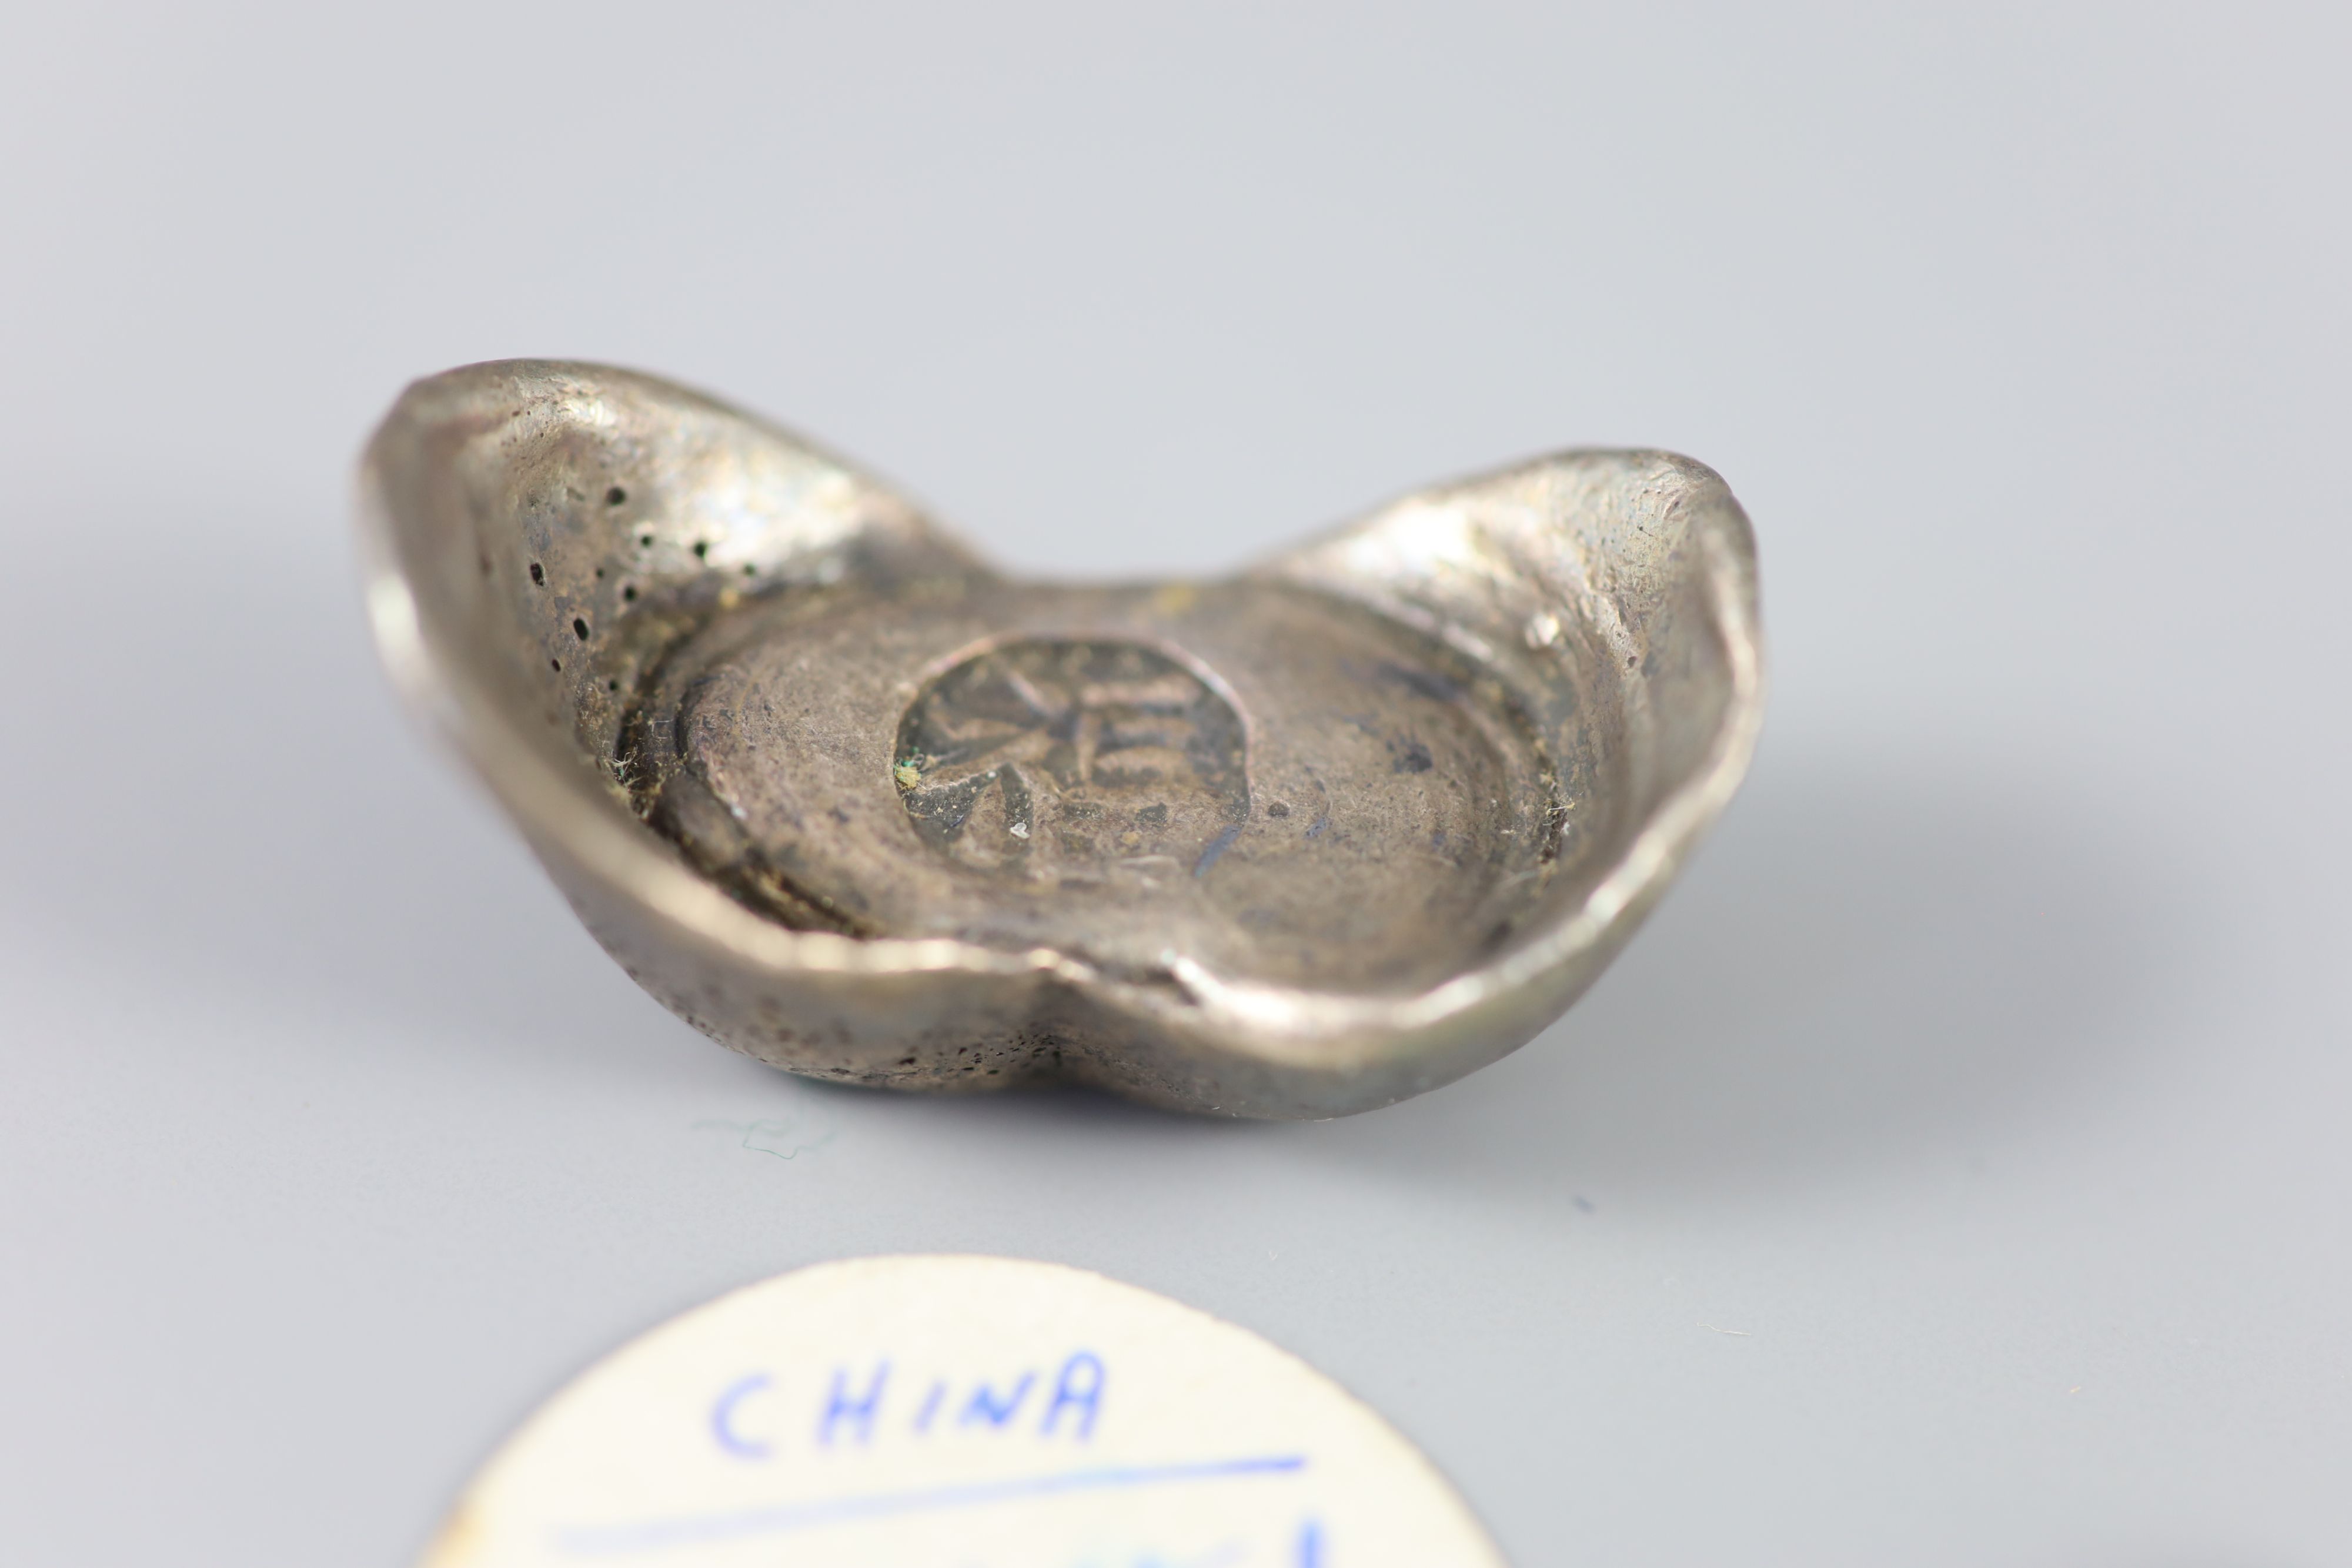 China Empire or Republic period, AR 1 Tael, 36.2g, half tael, 19.2g and quarter tael, 10.8g, all cast silver sycee,